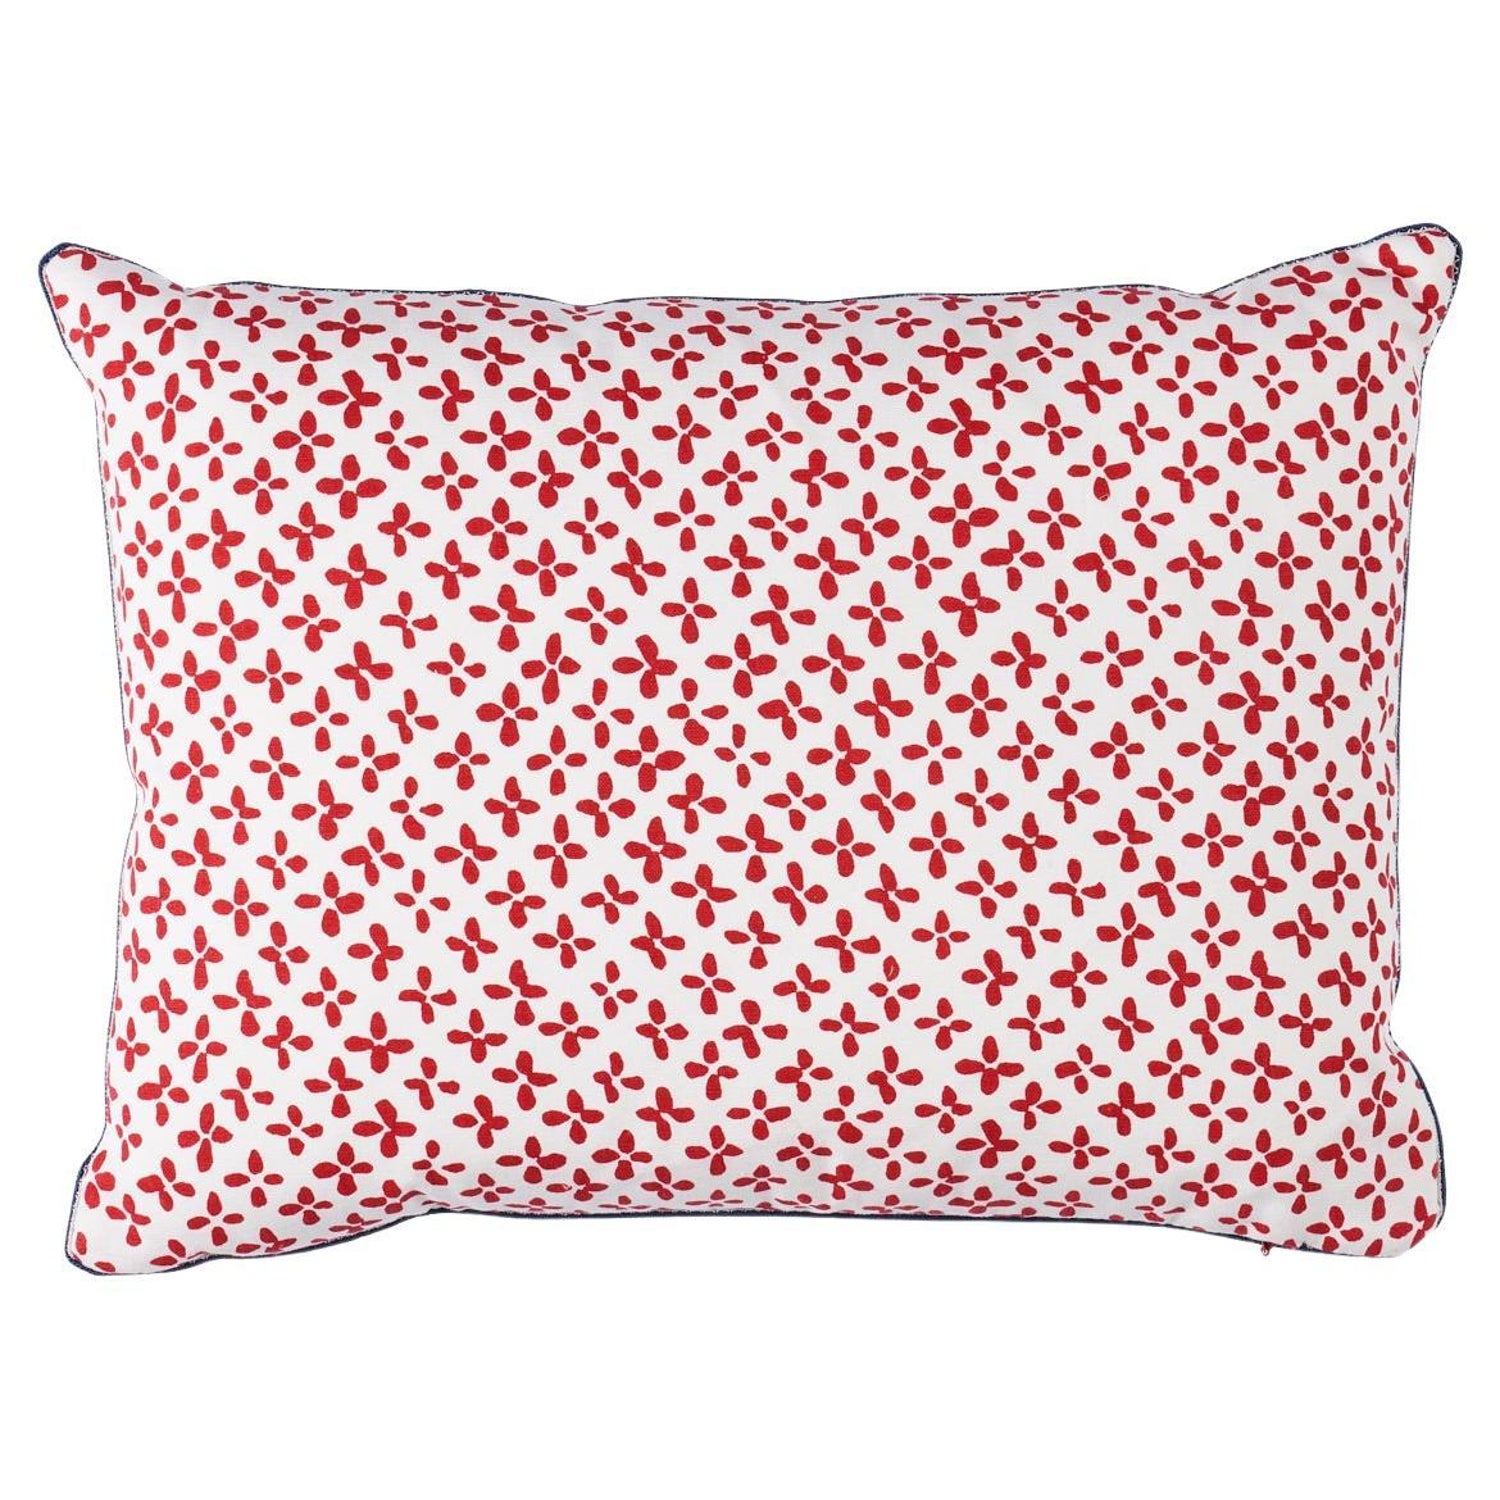 Schumacher Emerson 16" x 12" Pillow in Red For Sale at 1stDibs